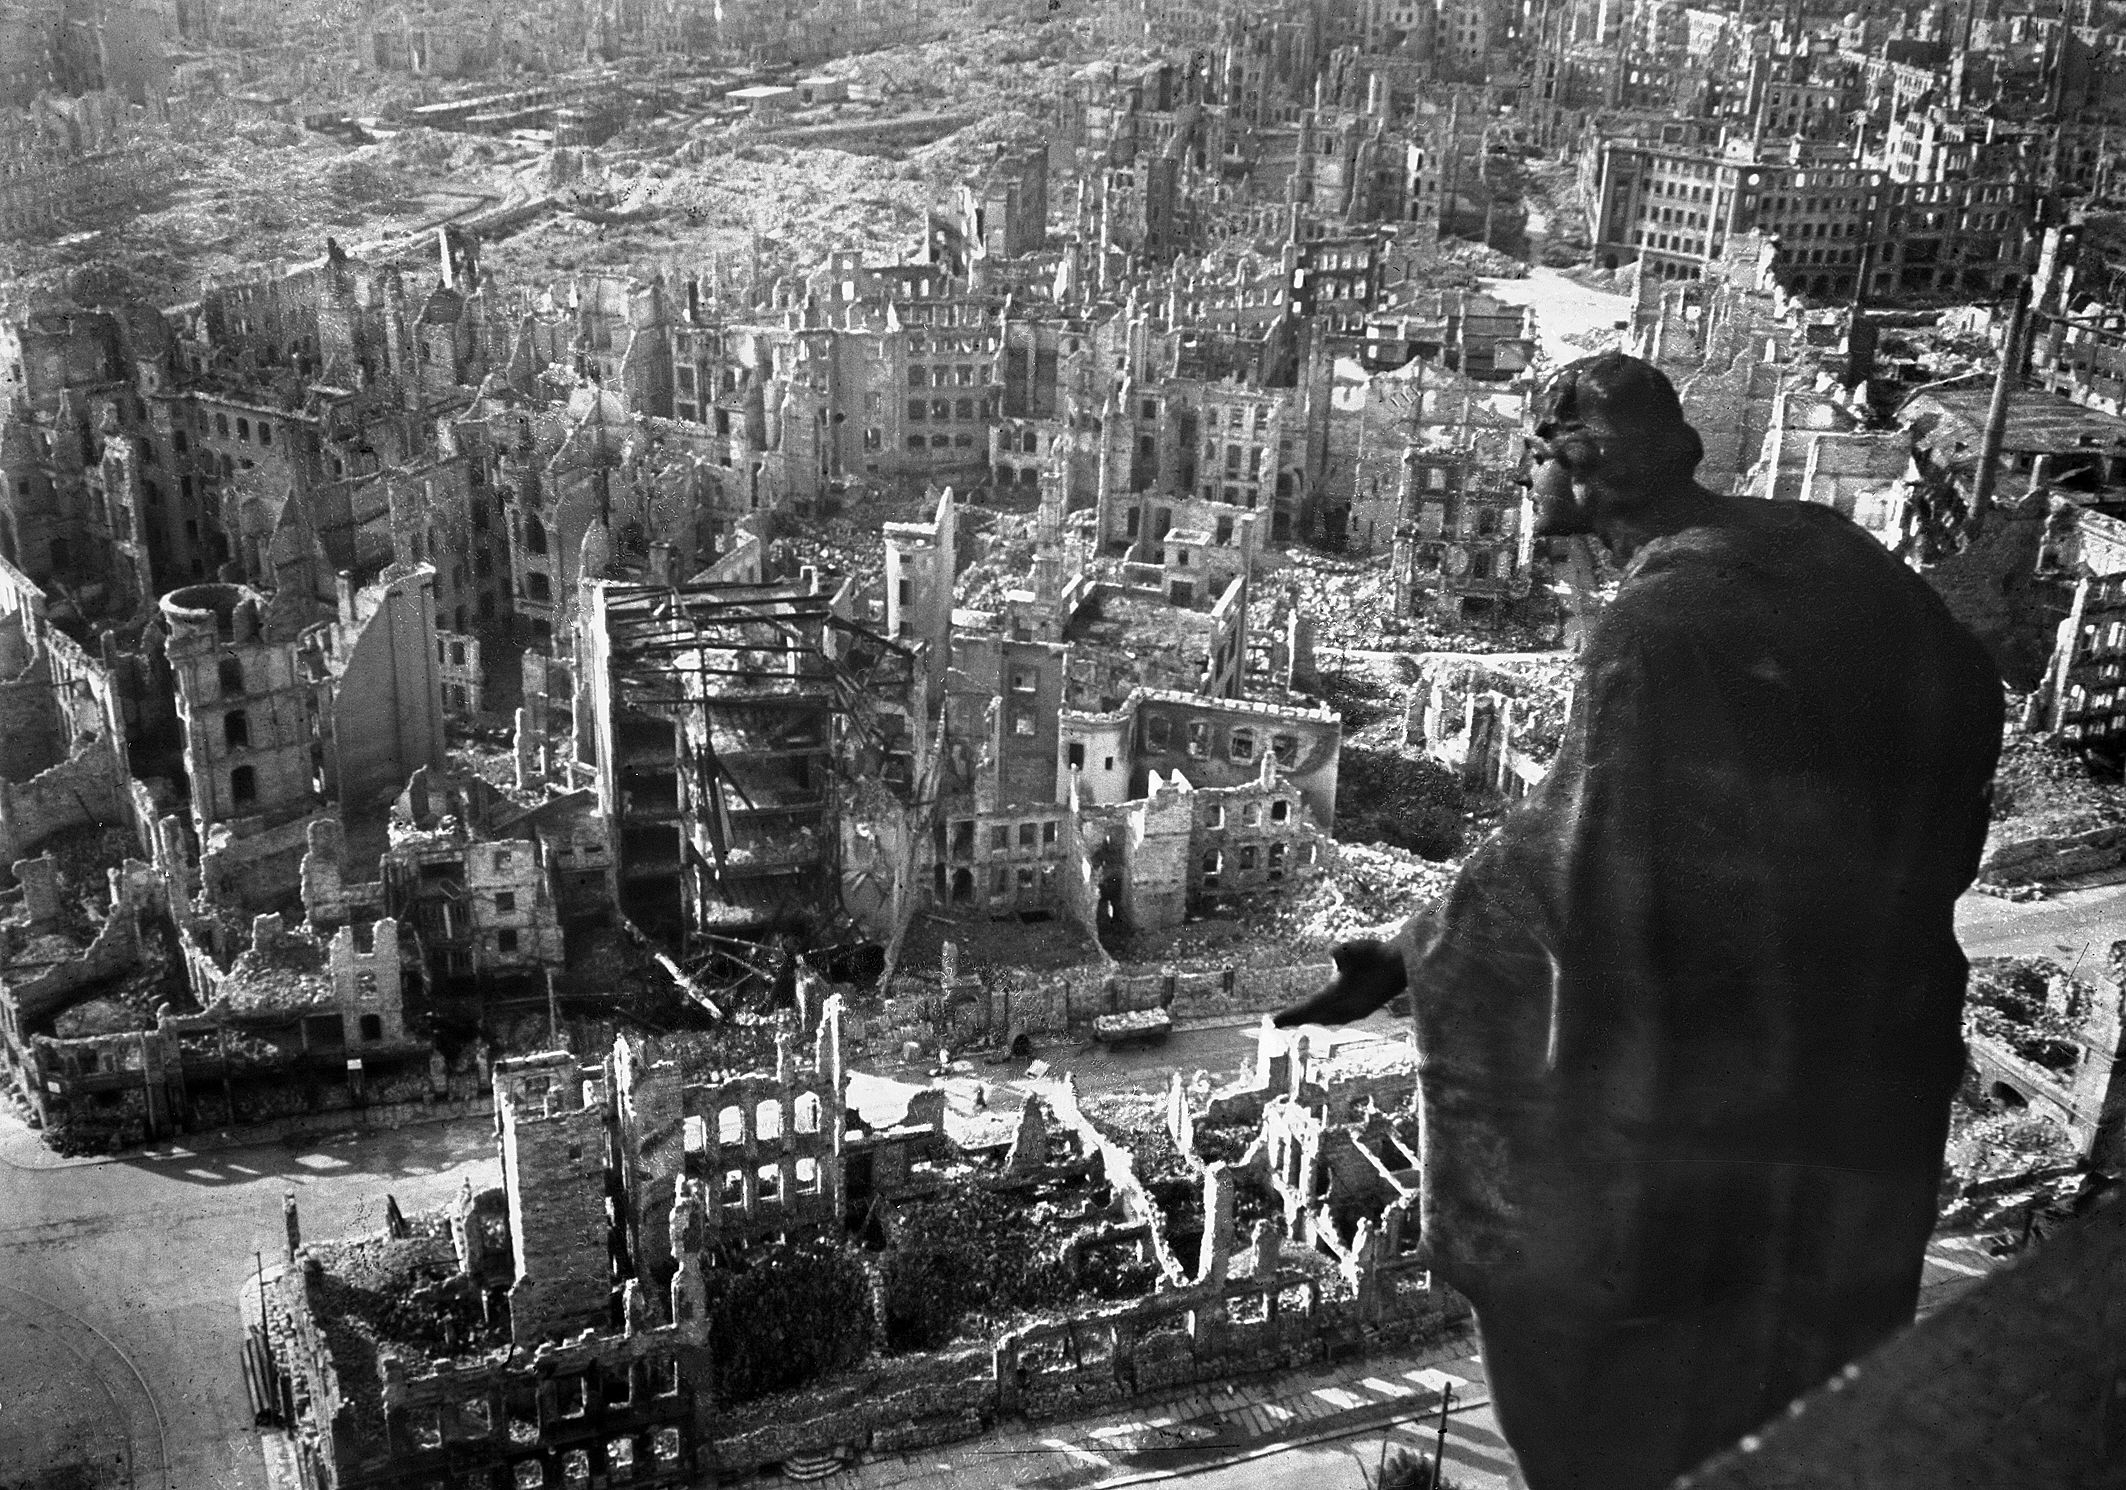 Dresden, Germany, after allied bombings on 15 February 1945